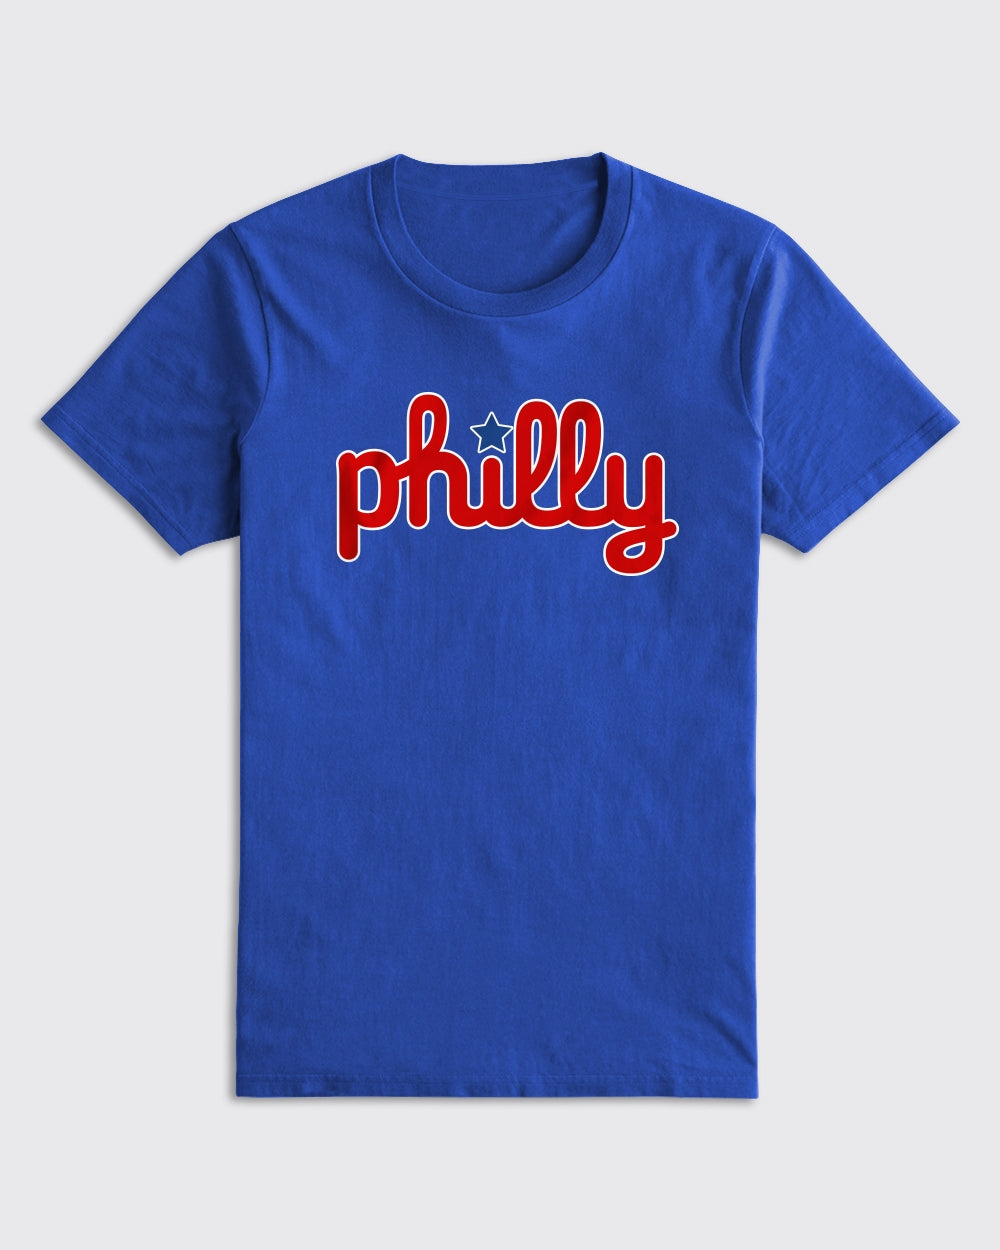 Philly sports eagles phillies flyers sixers t-shirt, hoodie